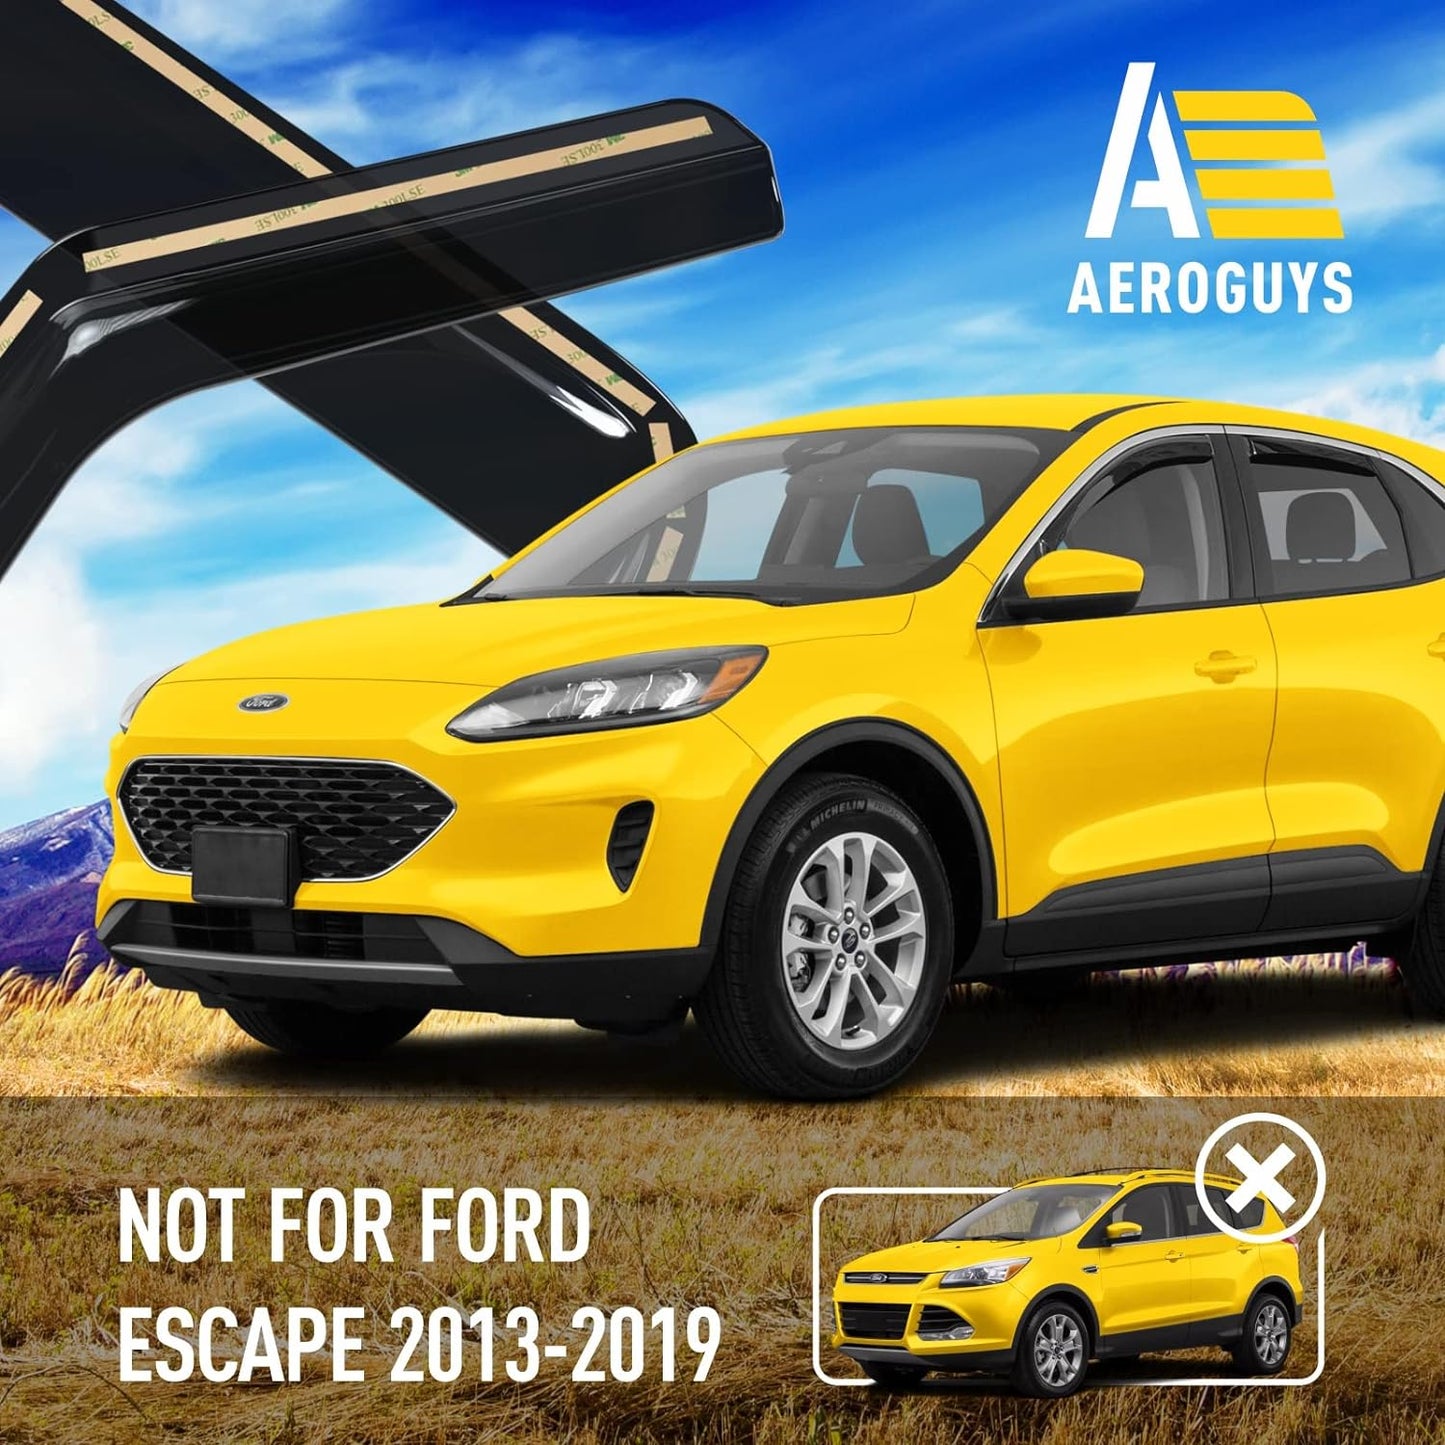 AEROGUYS
4.4★★★★
Extra Durable Window Deflectors in-Channel Window Visors Rain Guards Fit for Ford Escape 2020-2024, Sun Visors, Wind Vent Visors, Window Vent Shades, Exterior Car Accessories - 4 pcs. AG0038 - Selzalot